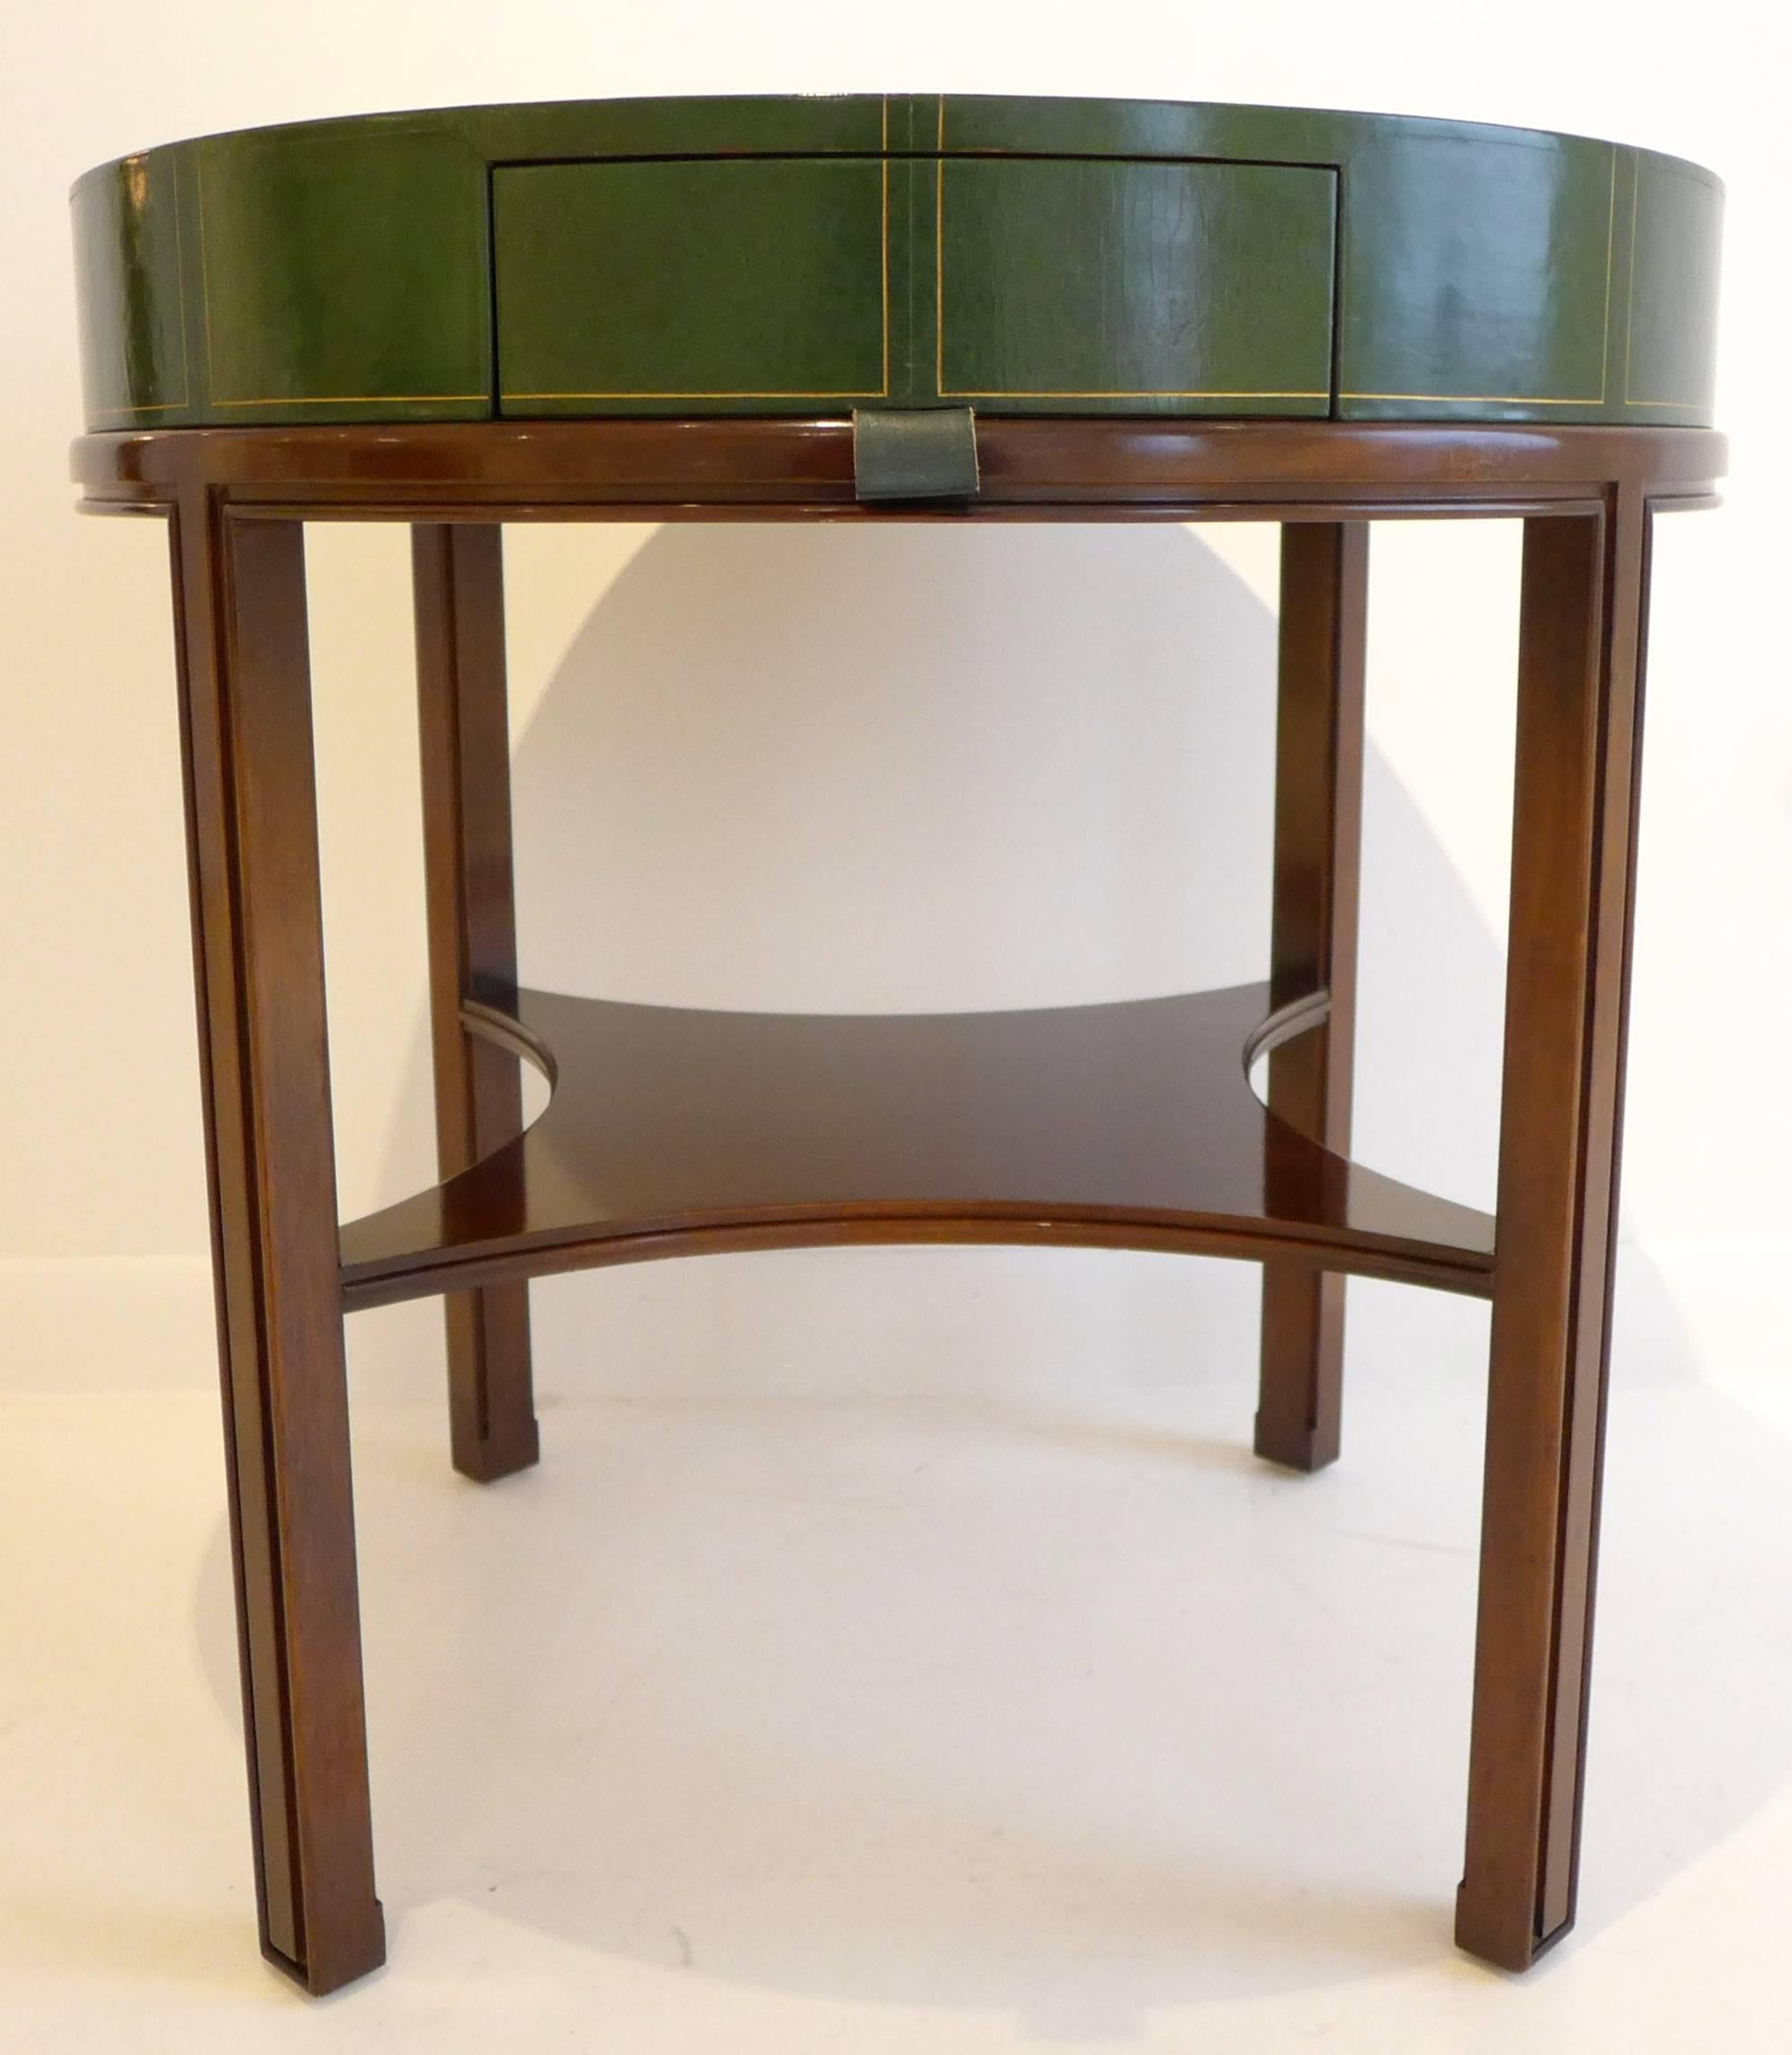 Moderne-style occasional table or game table with channeled mahogany base and green embossed leather top with mahogany center.  With a small drawer with leather pull and tapering medial shelf.  Designed by Tommi Parzinger and produced by Charak, c.